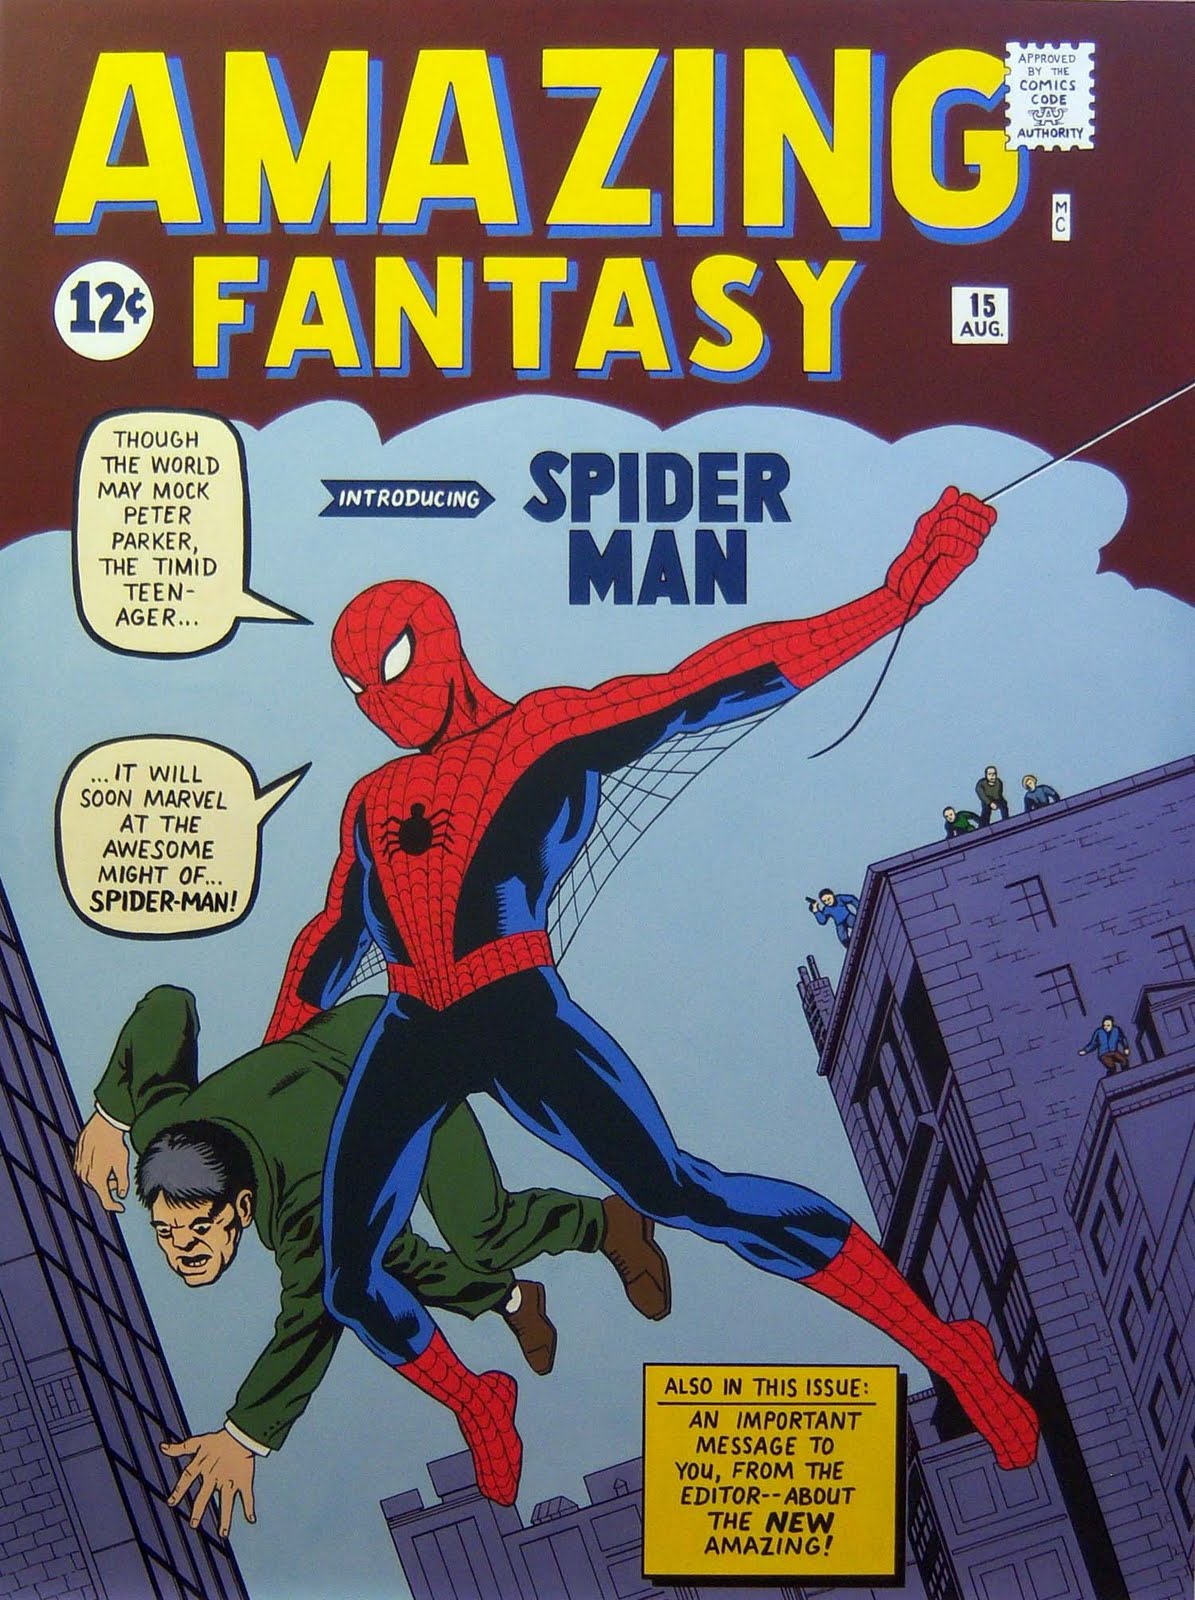 The Mystery behind the Cover of Amazing Fantasy #15 – Carl's Comix